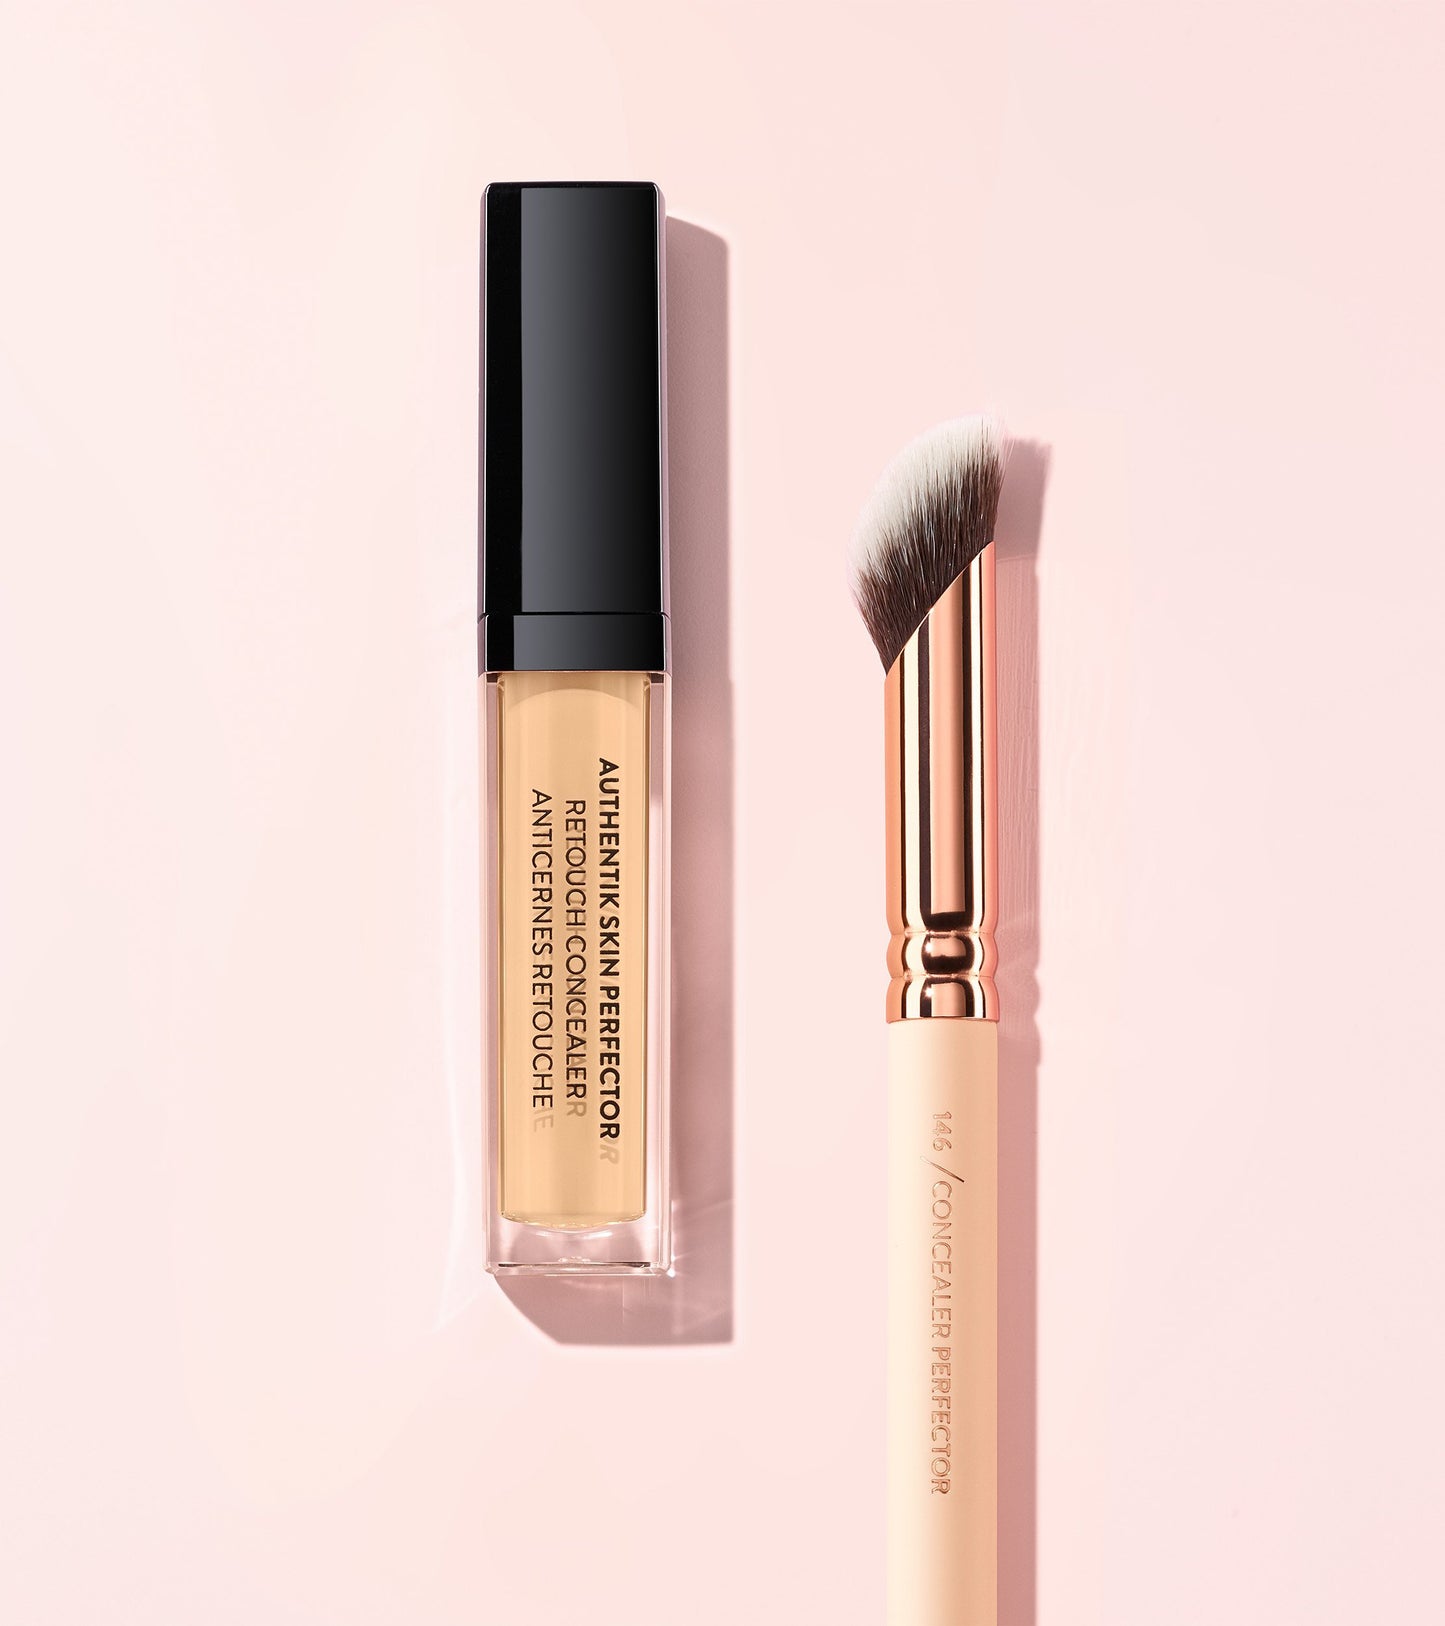 AUTHENTIK SKIN PERFECTOR CONCEALER (180 OFFICIAL) Expanded Image 3